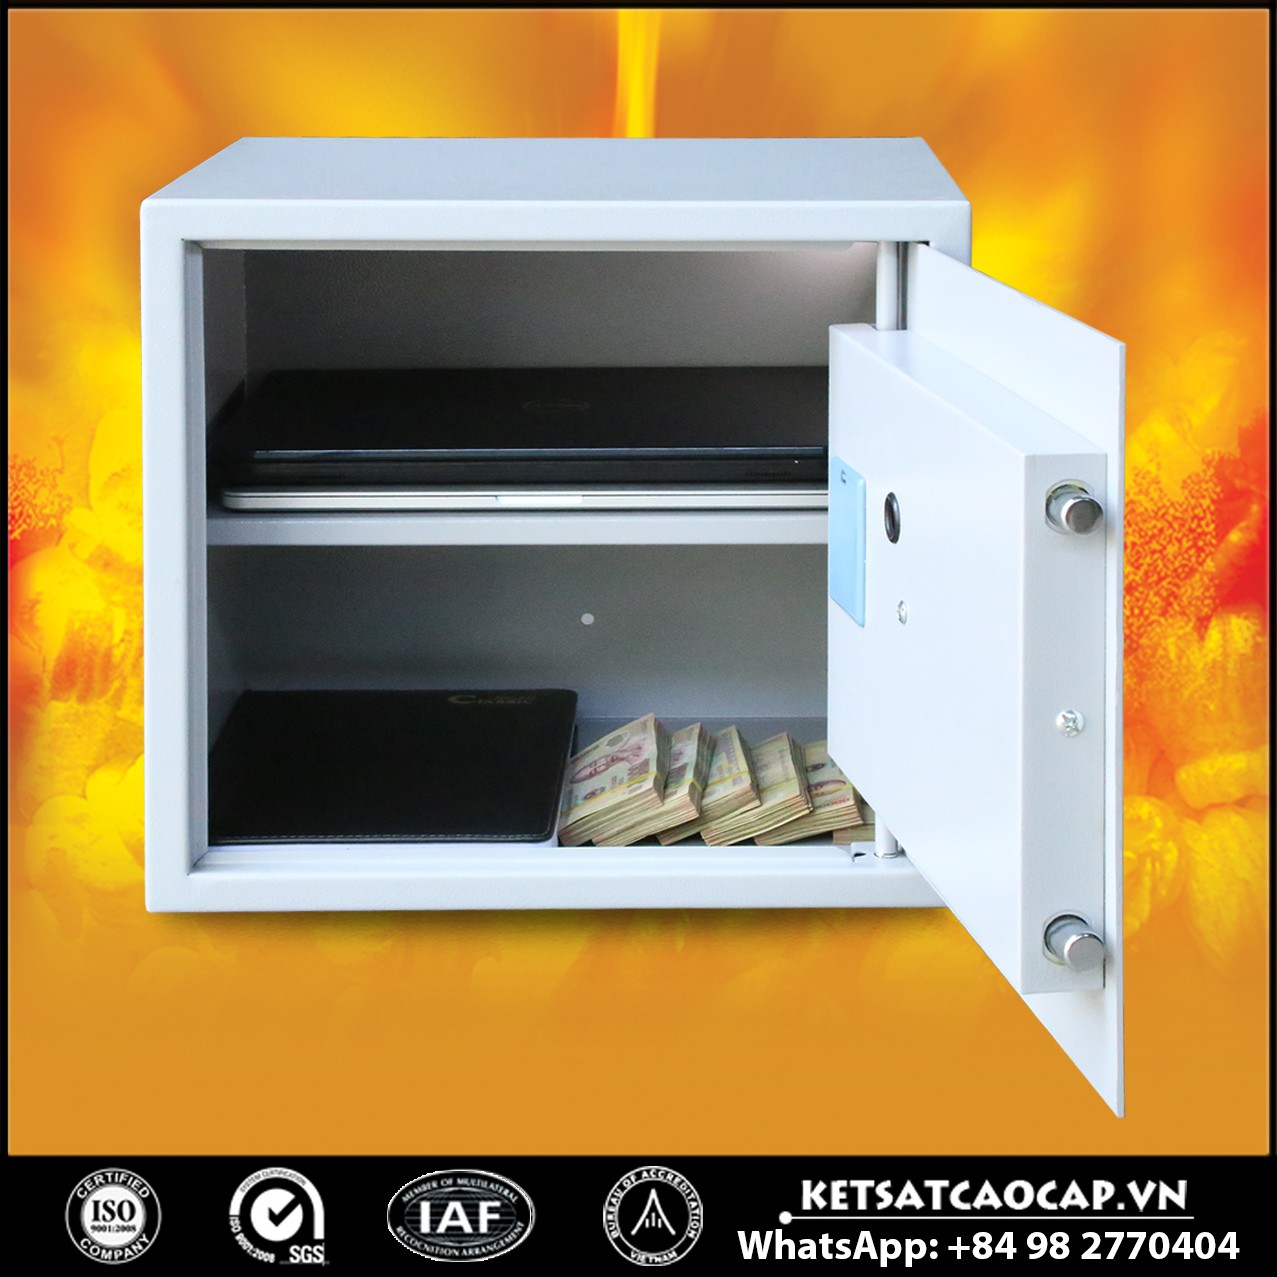 Hotel Security Box Perfect For Hotel Safety Deposit Box Manufacturers & Suppliers‎